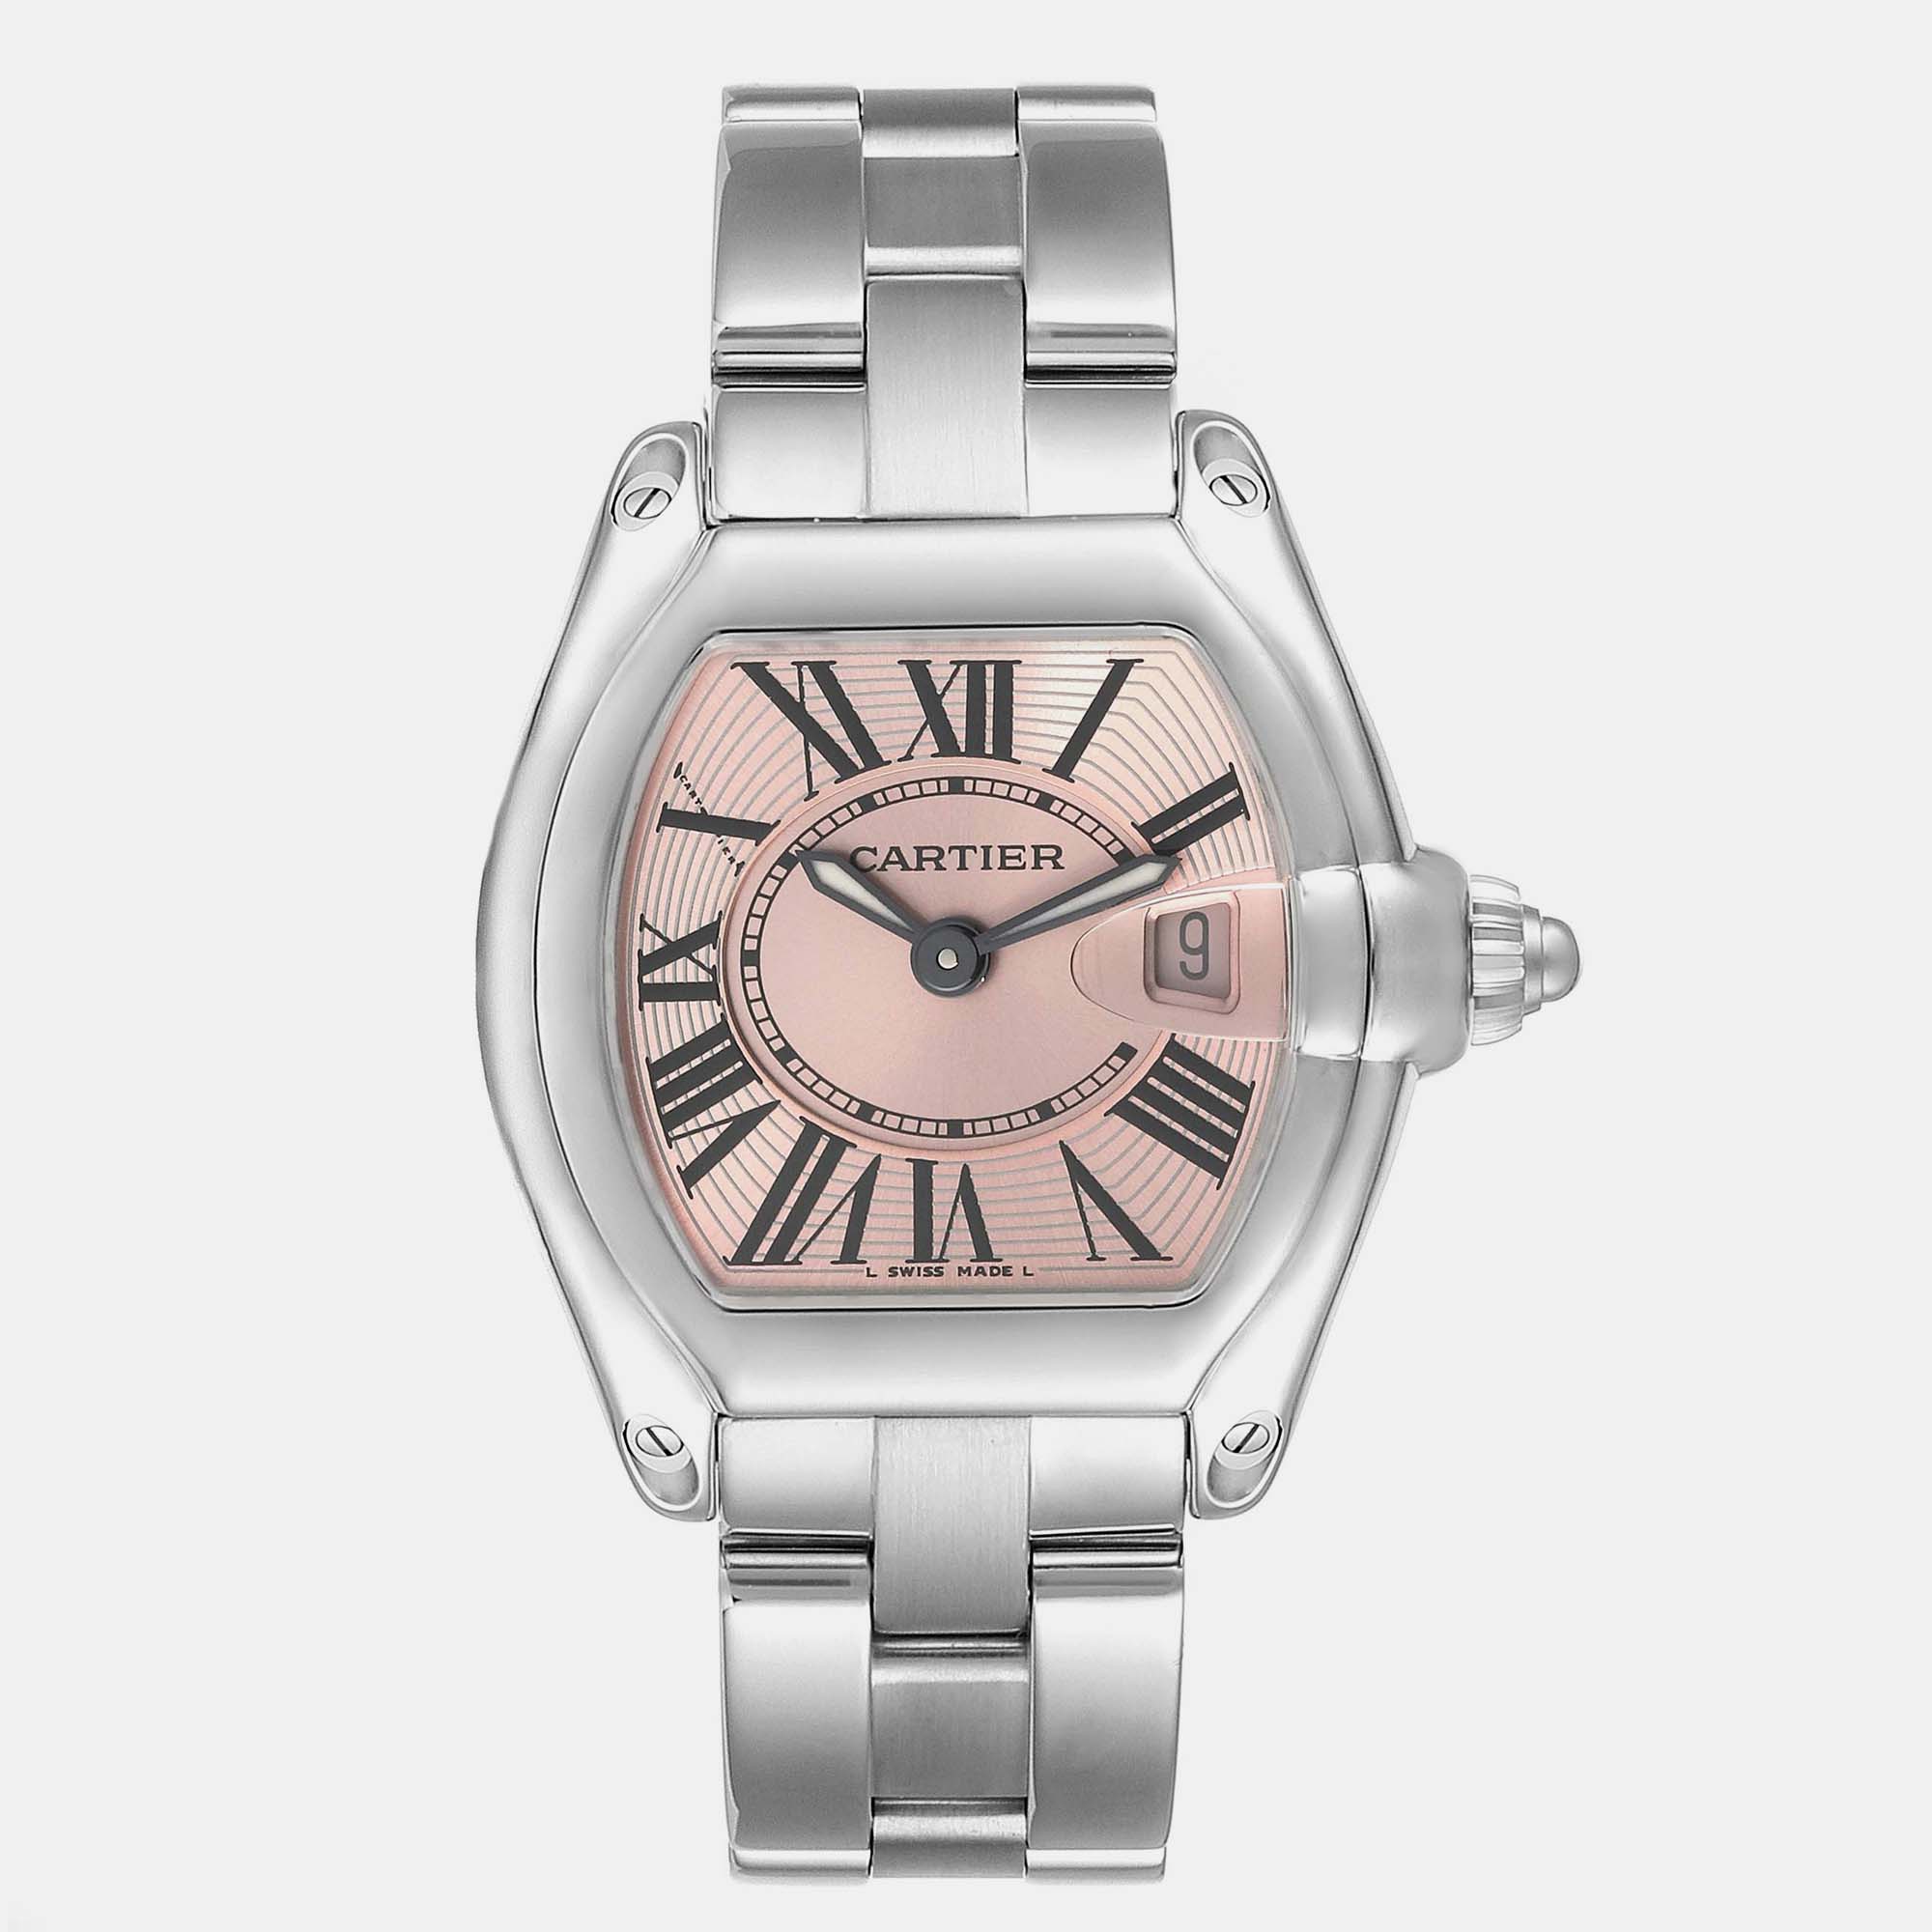 The charm of a finely crafted wristwatch accompanies the wearer through the years and to any occasion they have a date for. It is this charm infused with timeless luxury that makes this Cartier wristwatch such an incredible pick.